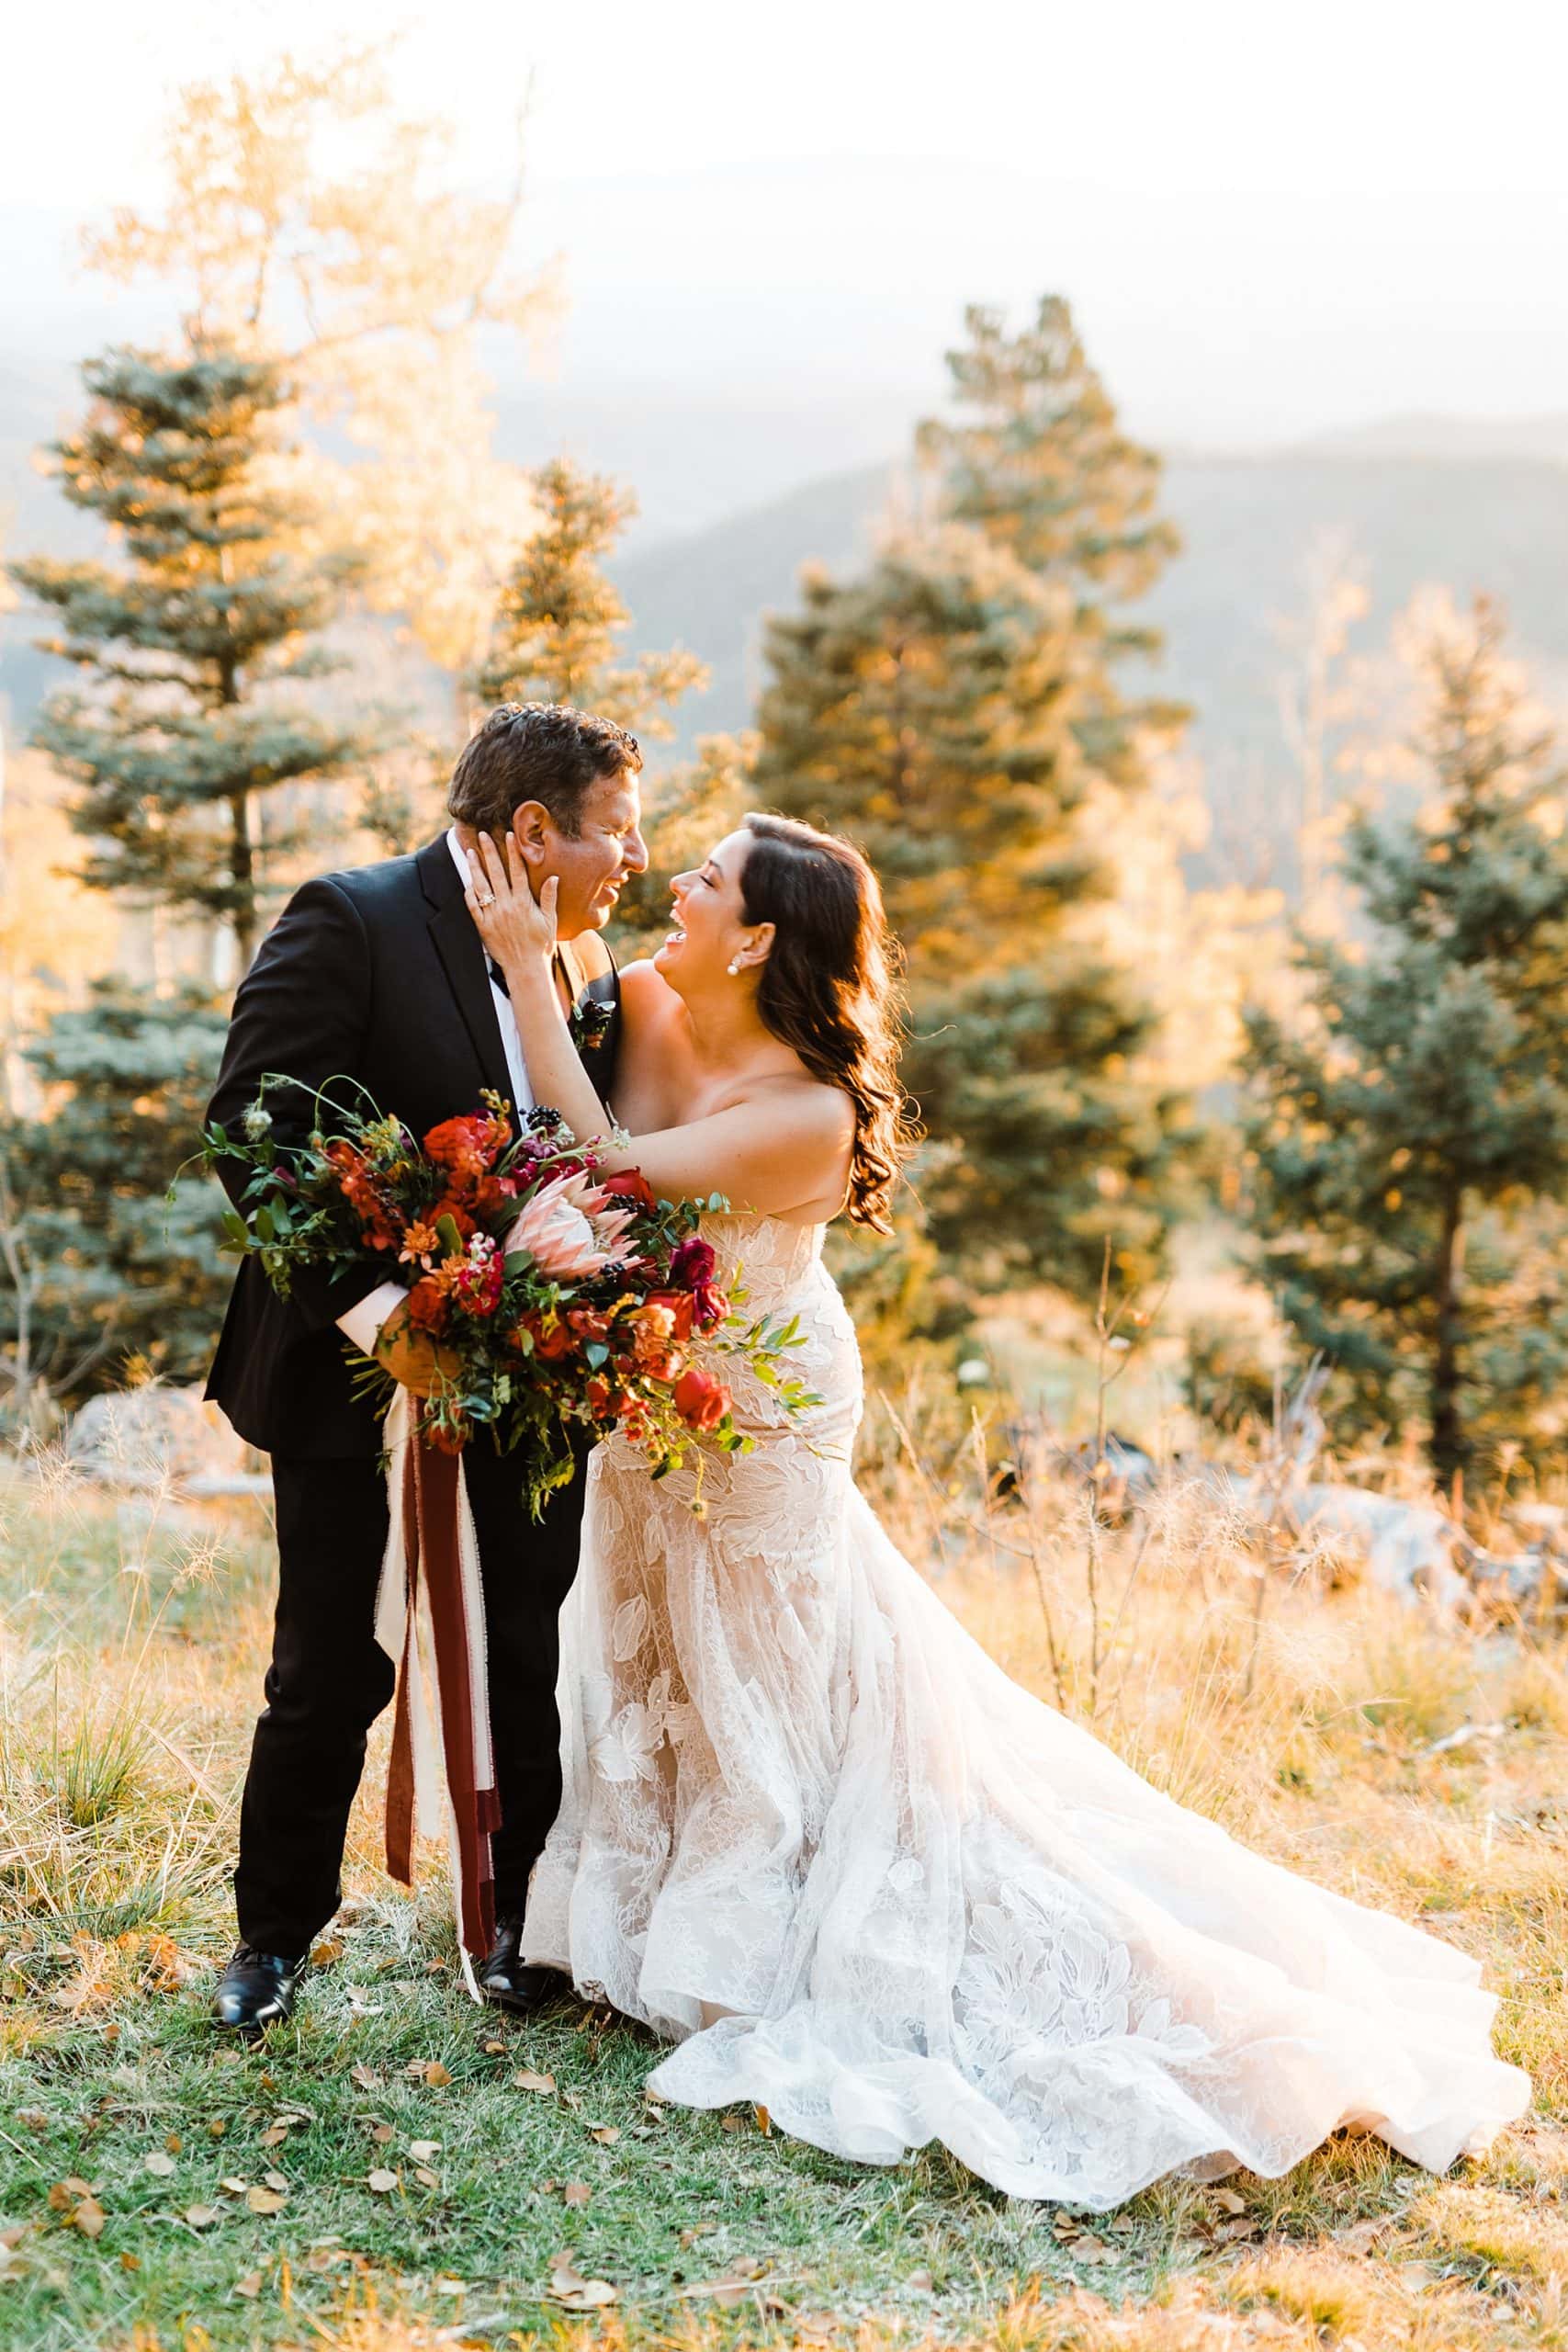 A couple celebrates their Santa Fe elopement in a forest while holding florals